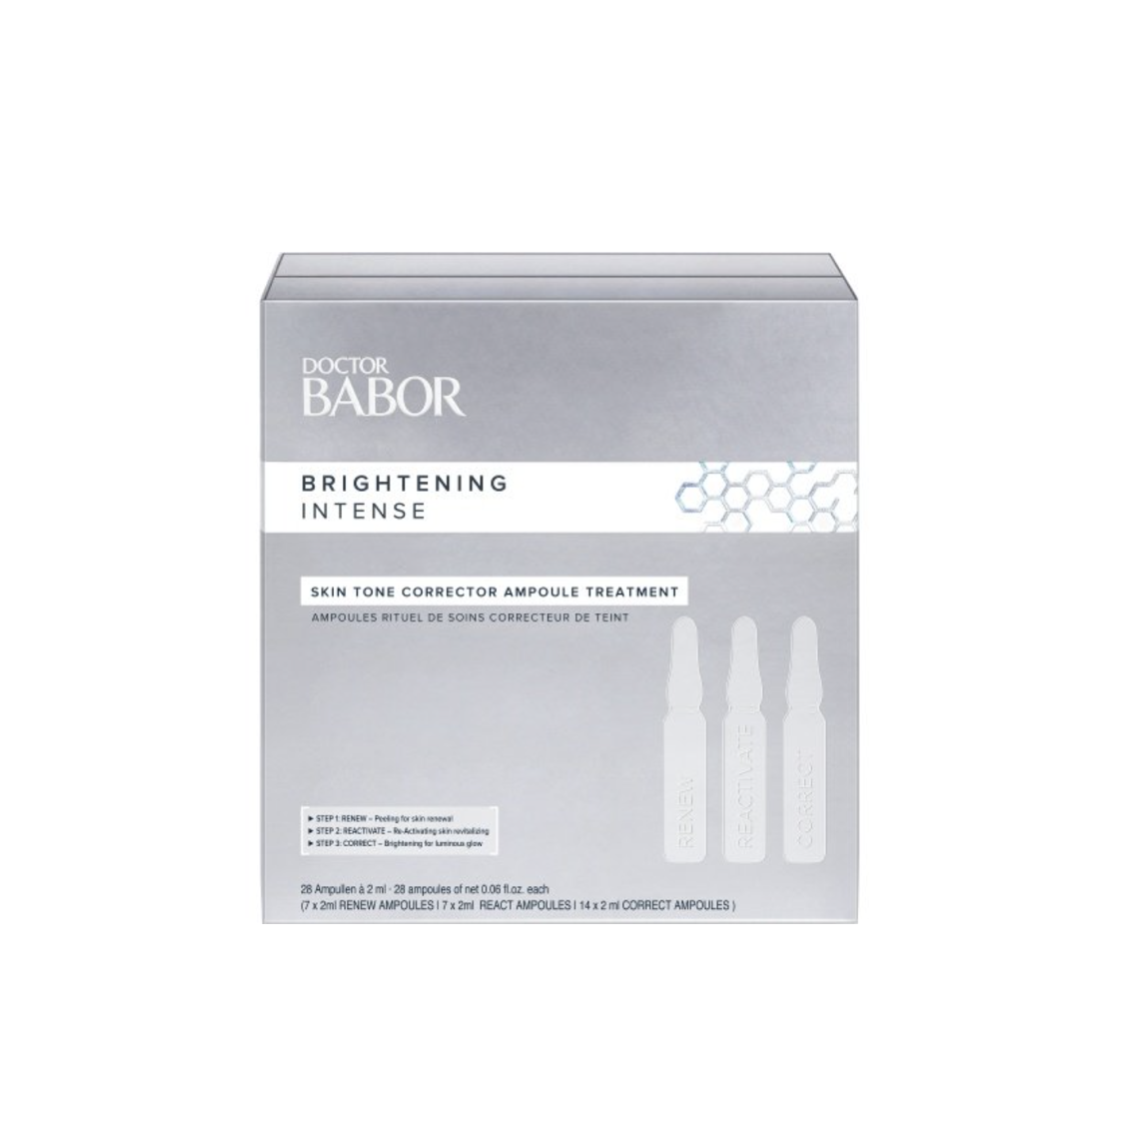 Doctor Babor Brightening Intense, Skin Tone Corrector Ampoule Treatment